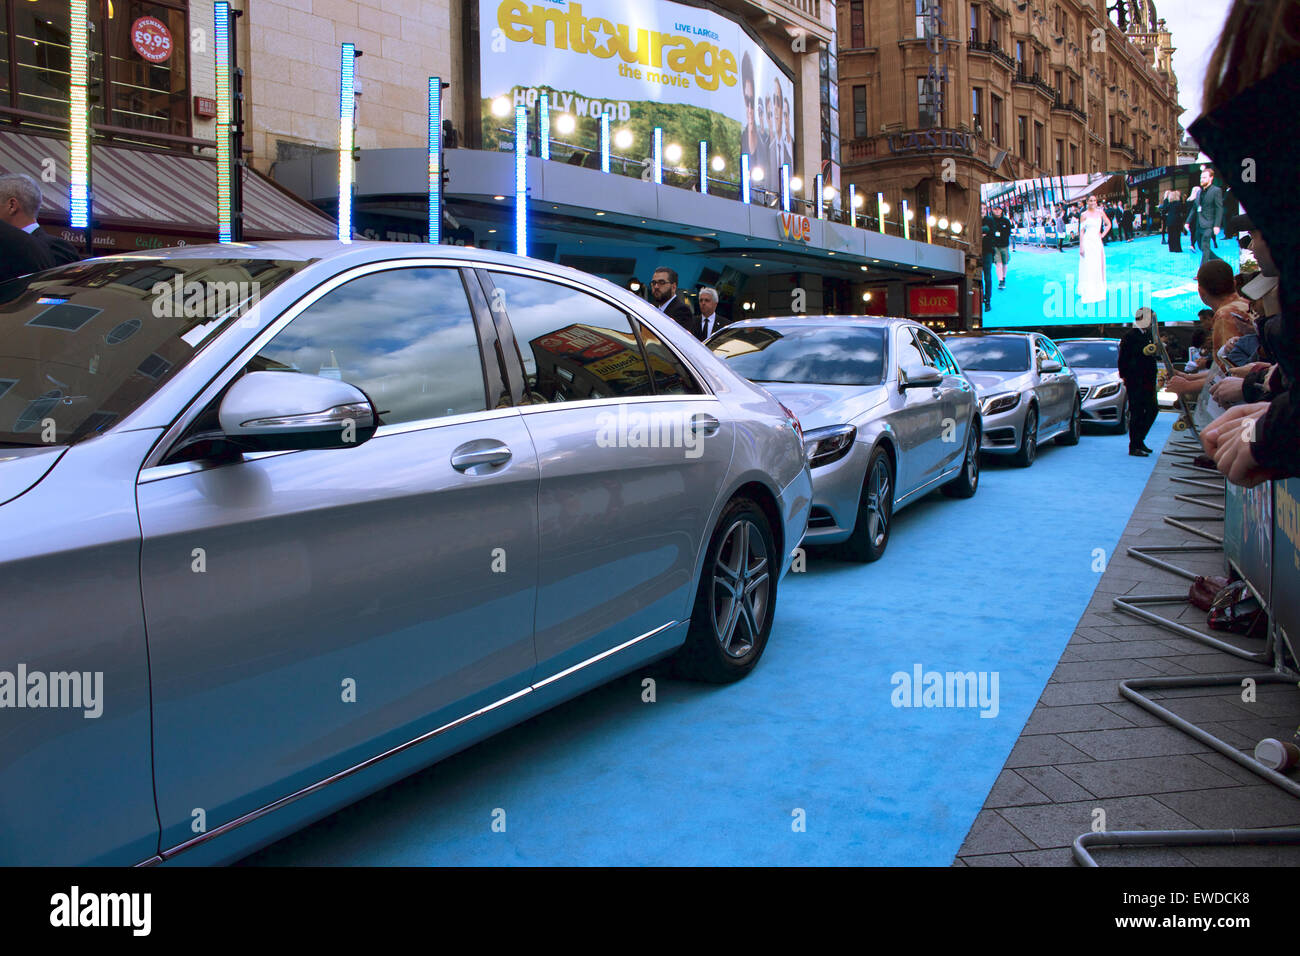 Leicester square,London,June 9 2015,Luxury Cars Stock Photo